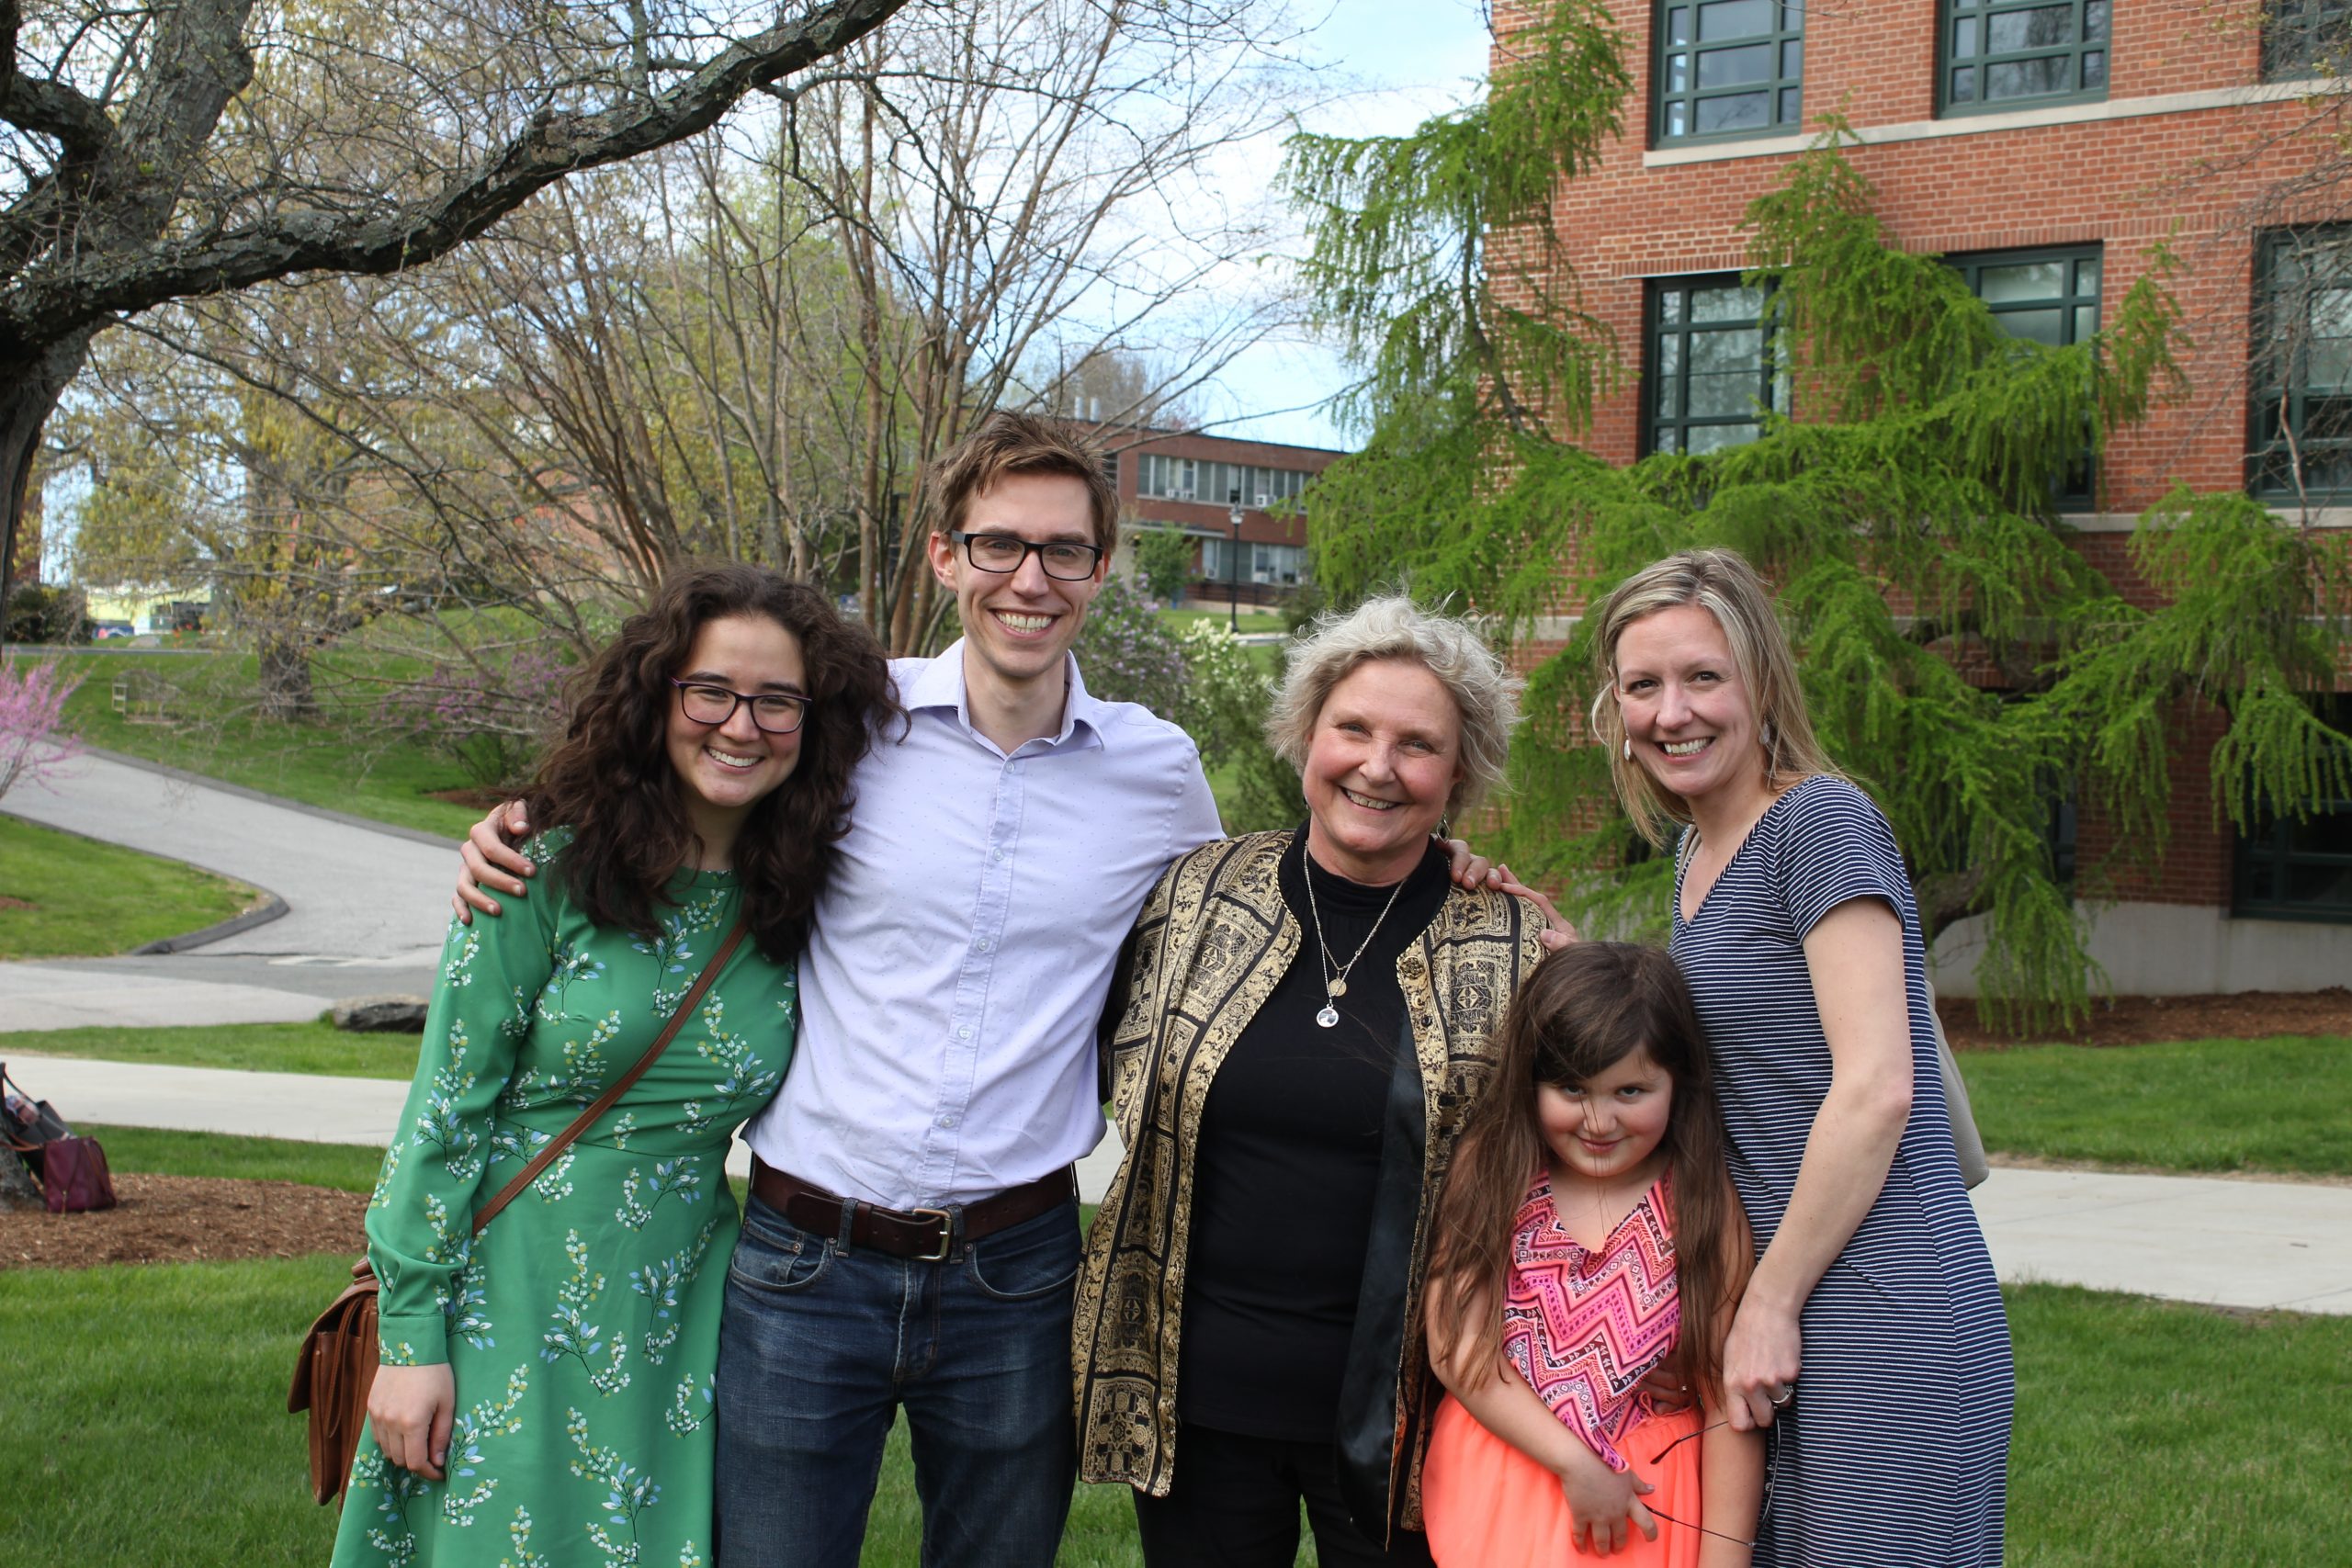 Bushmich (center) with her family, from left Liz, Alex, Violet, and Aurora. (Kevin Noonan/UConn Photo)